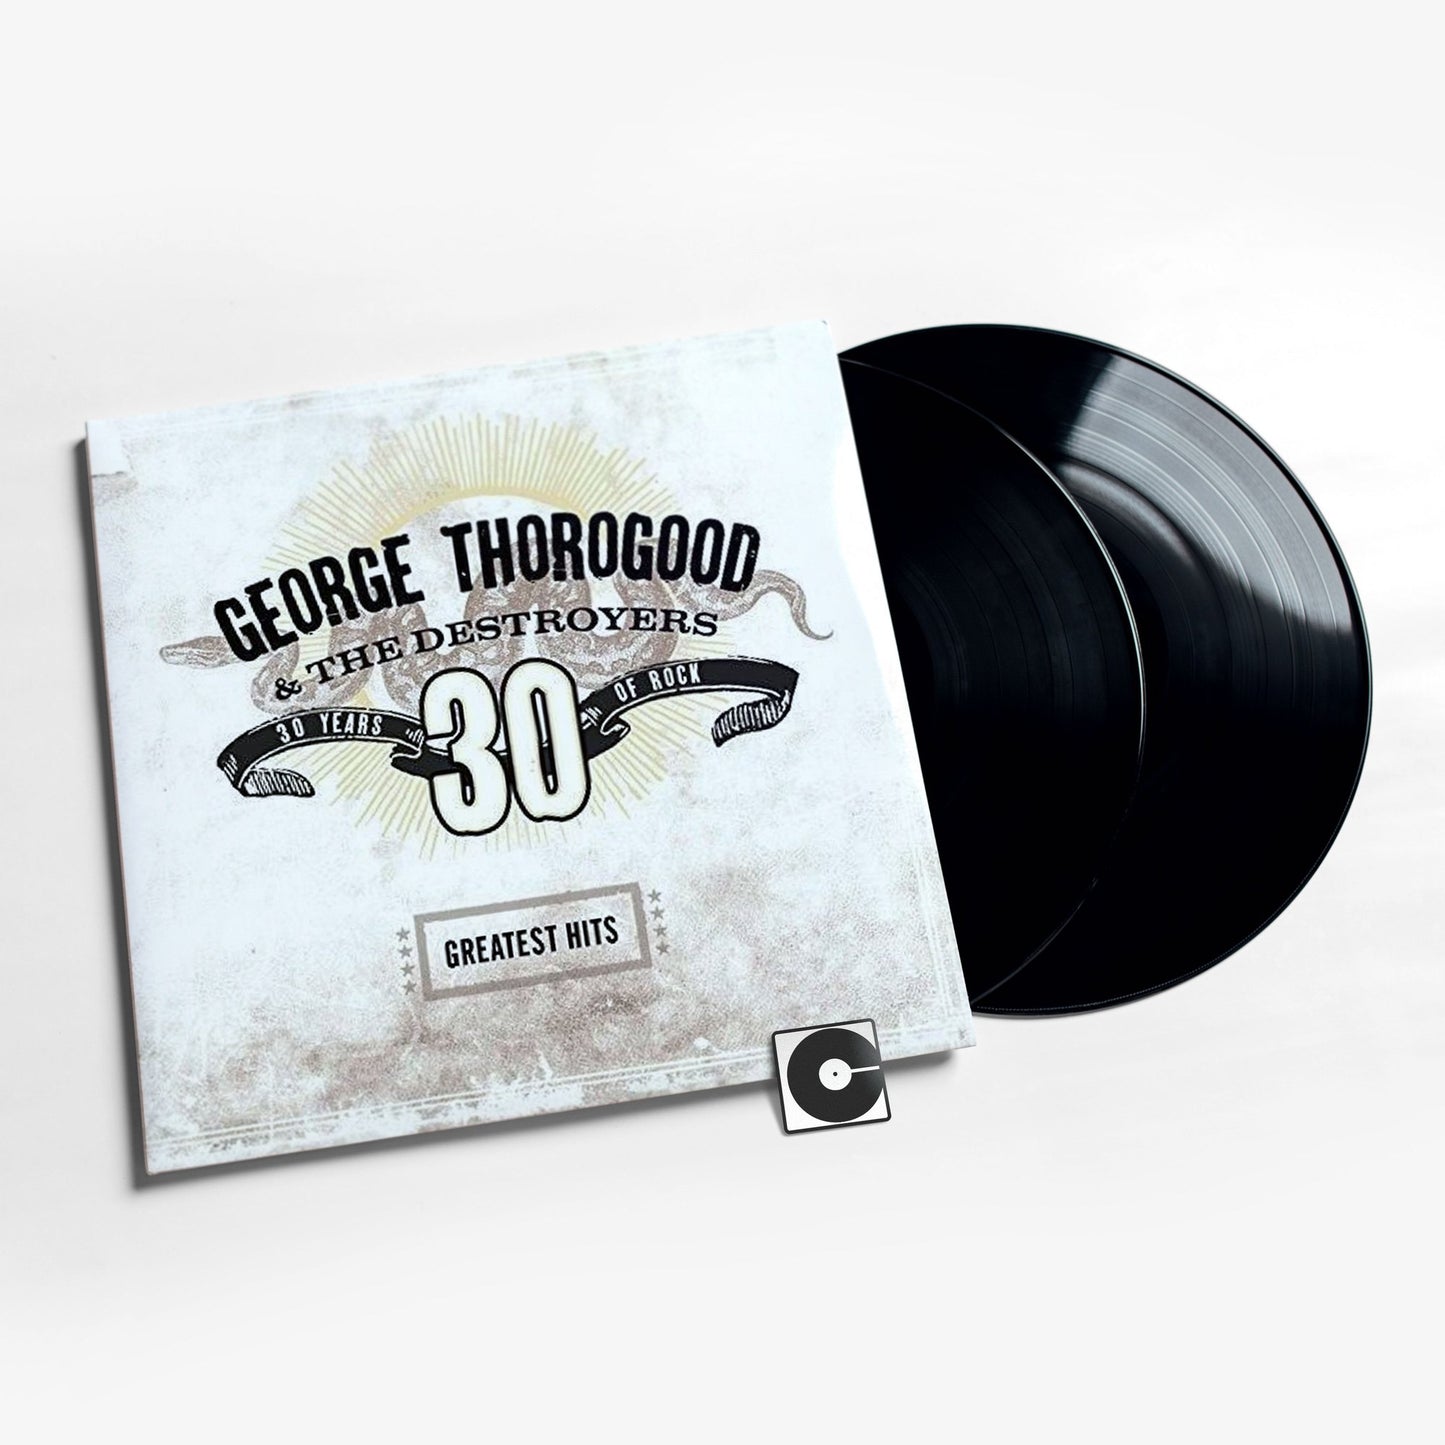 George Thorogood & The Destroyers - "Greatest Hits: 30 Years Of Rock"